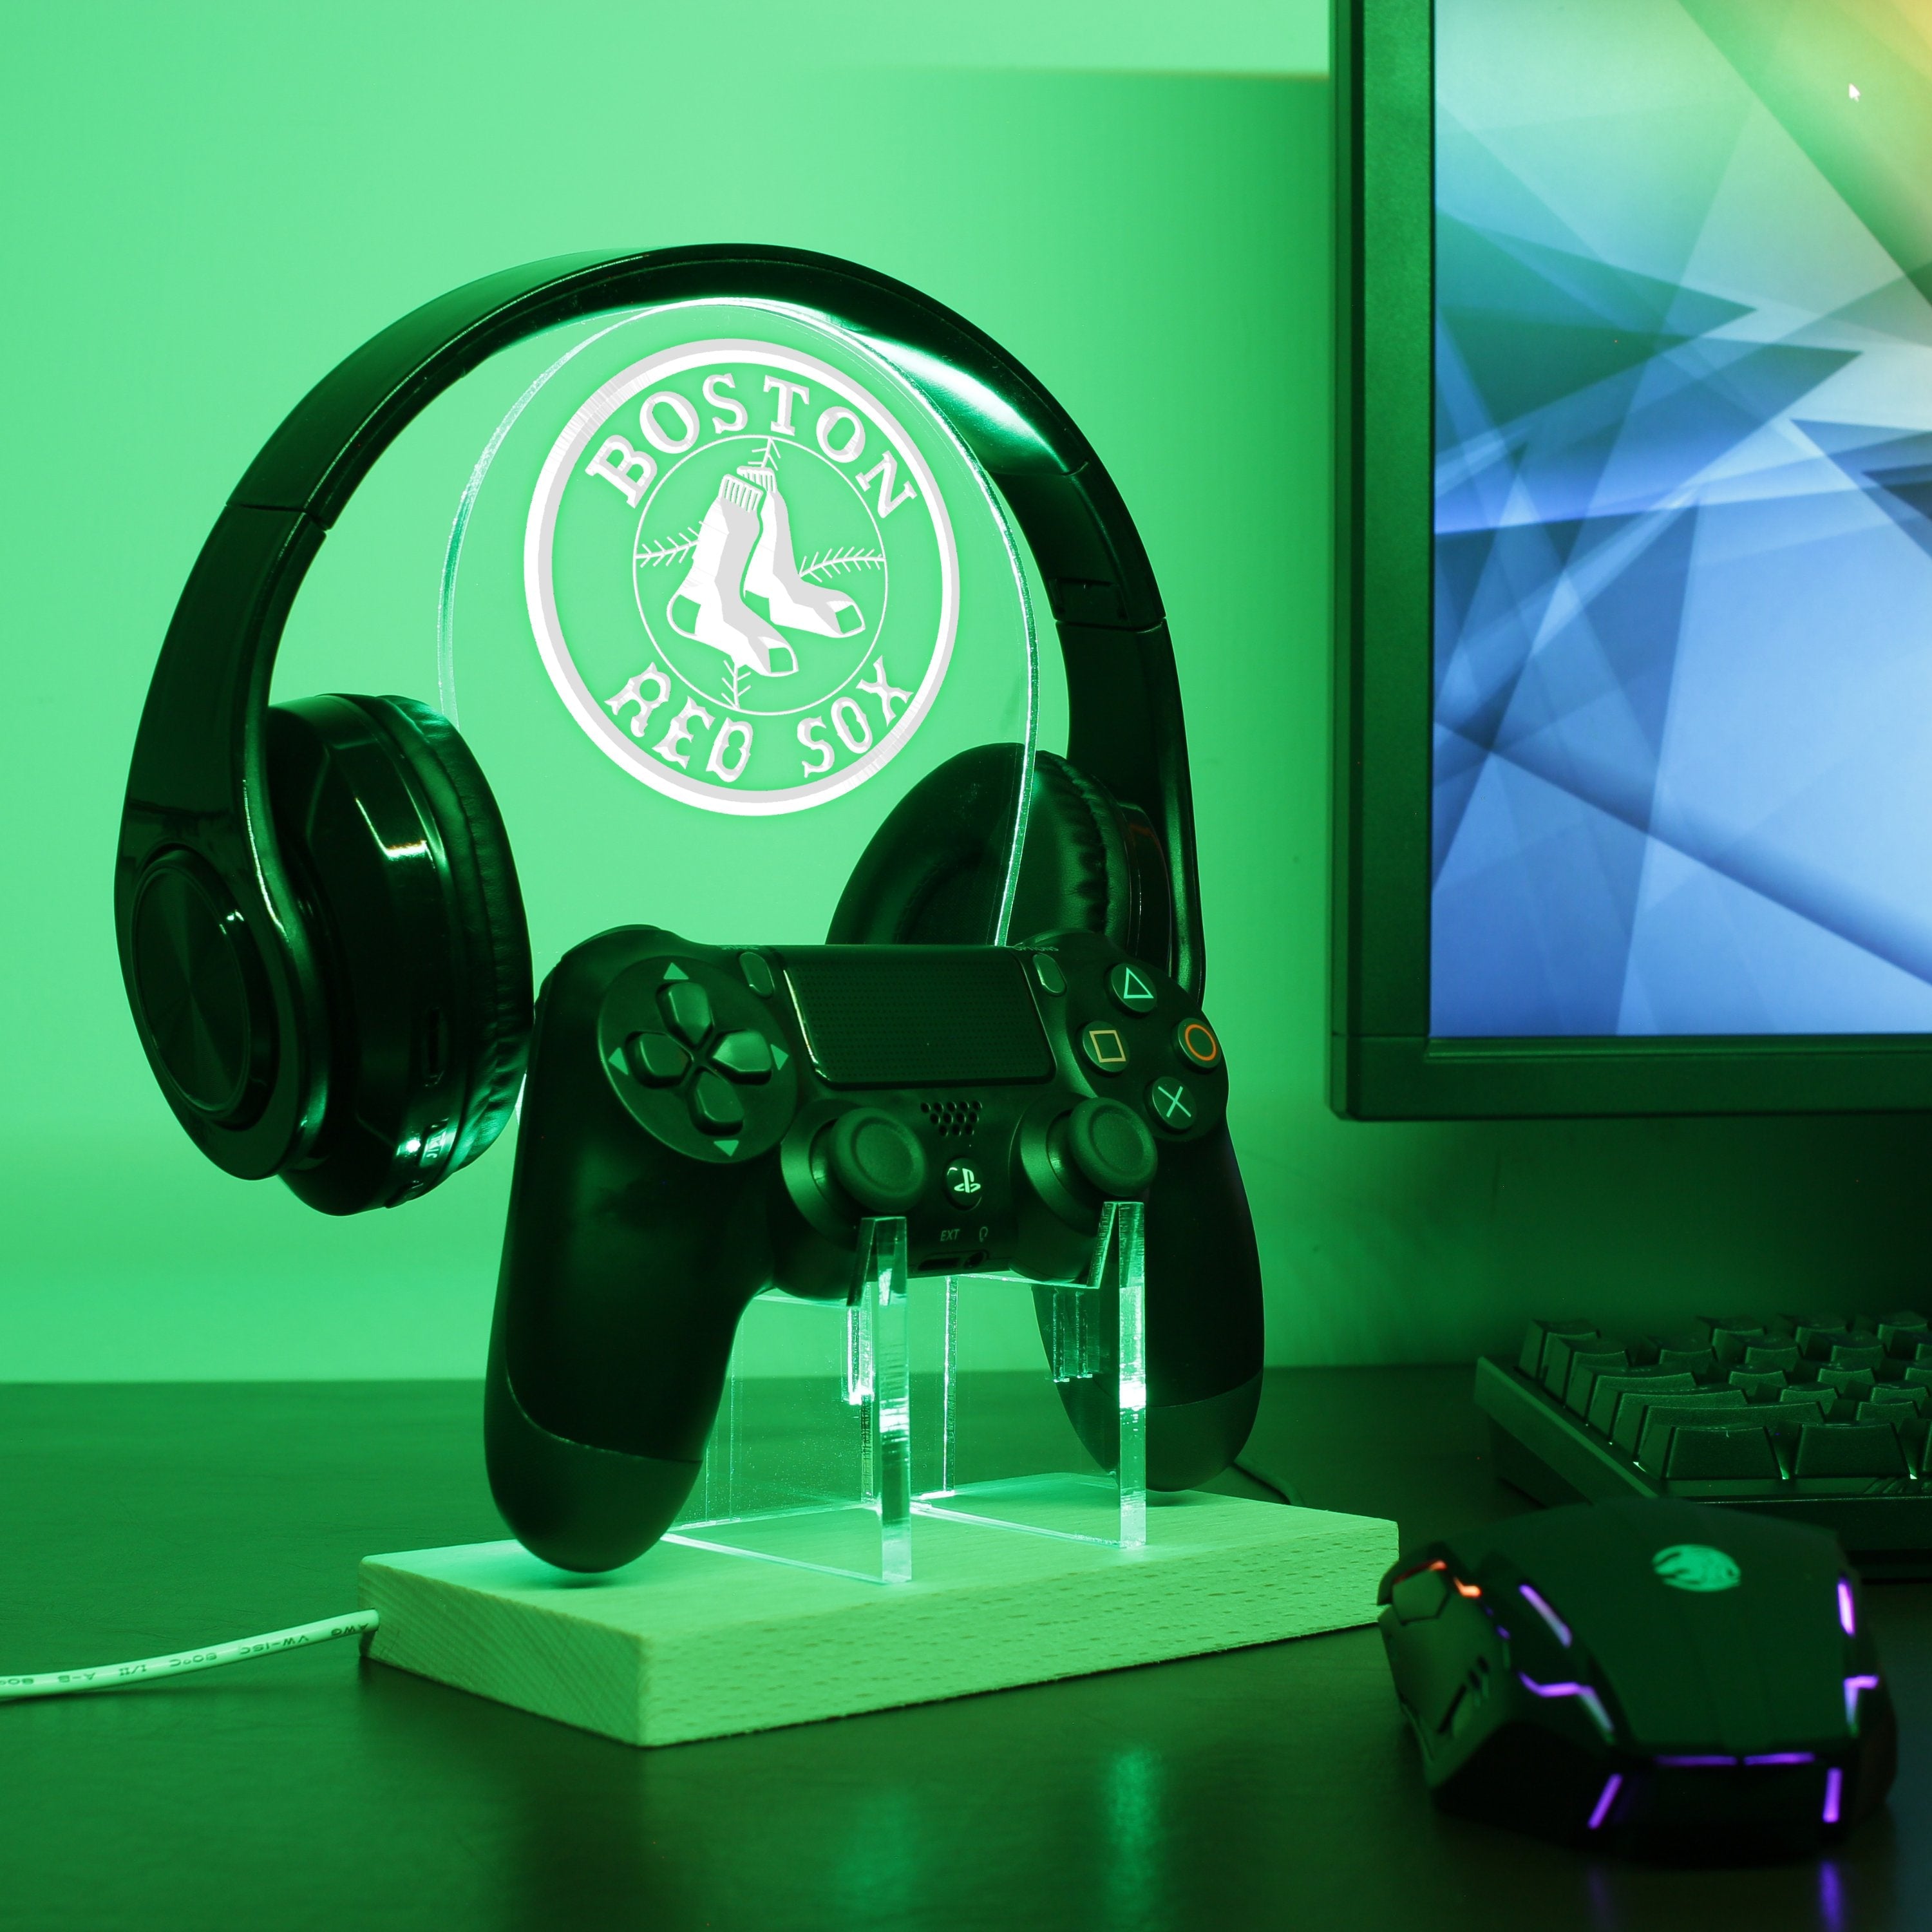 Boston Red Sox LED Gaming Headset Controller Stand